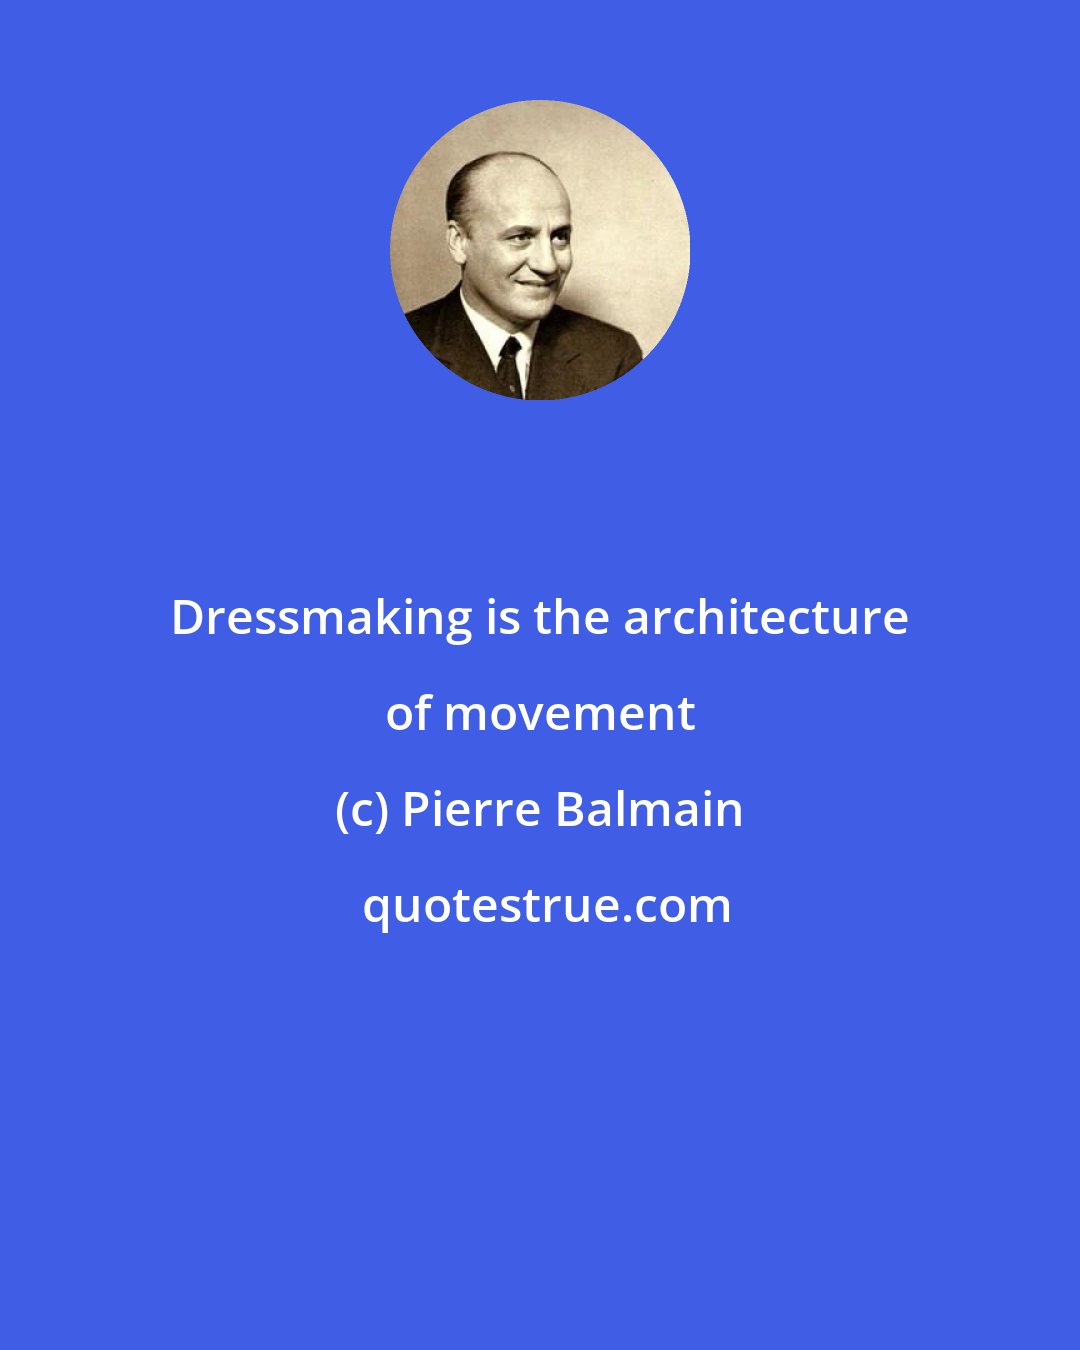 Pierre Balmain: Dressmaking is the architecture of movement